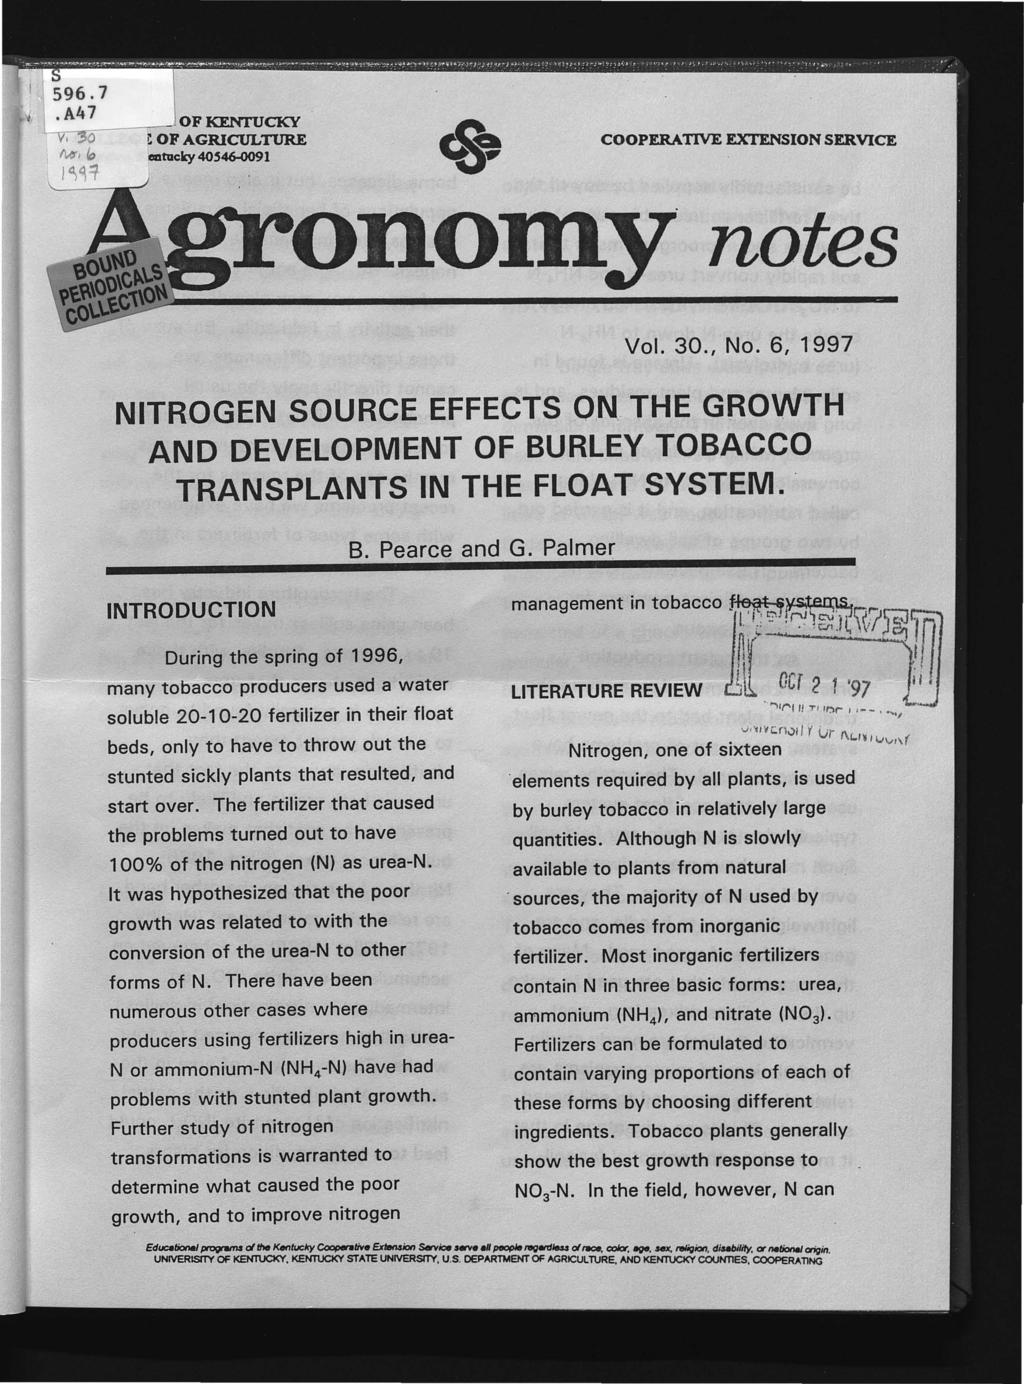 COOPERATIVE EXTENSION SERVICE nomy notes NITR-OGEN SOURCE EFFECTS ON.. Vol. 3., No. 6, 1997 THE GROWTH AND DEVELOPMENT OF BURLEY TOBACCO TRANSPLANTS IN THE FLOAT SYSTEM.. B. Pearce and G.